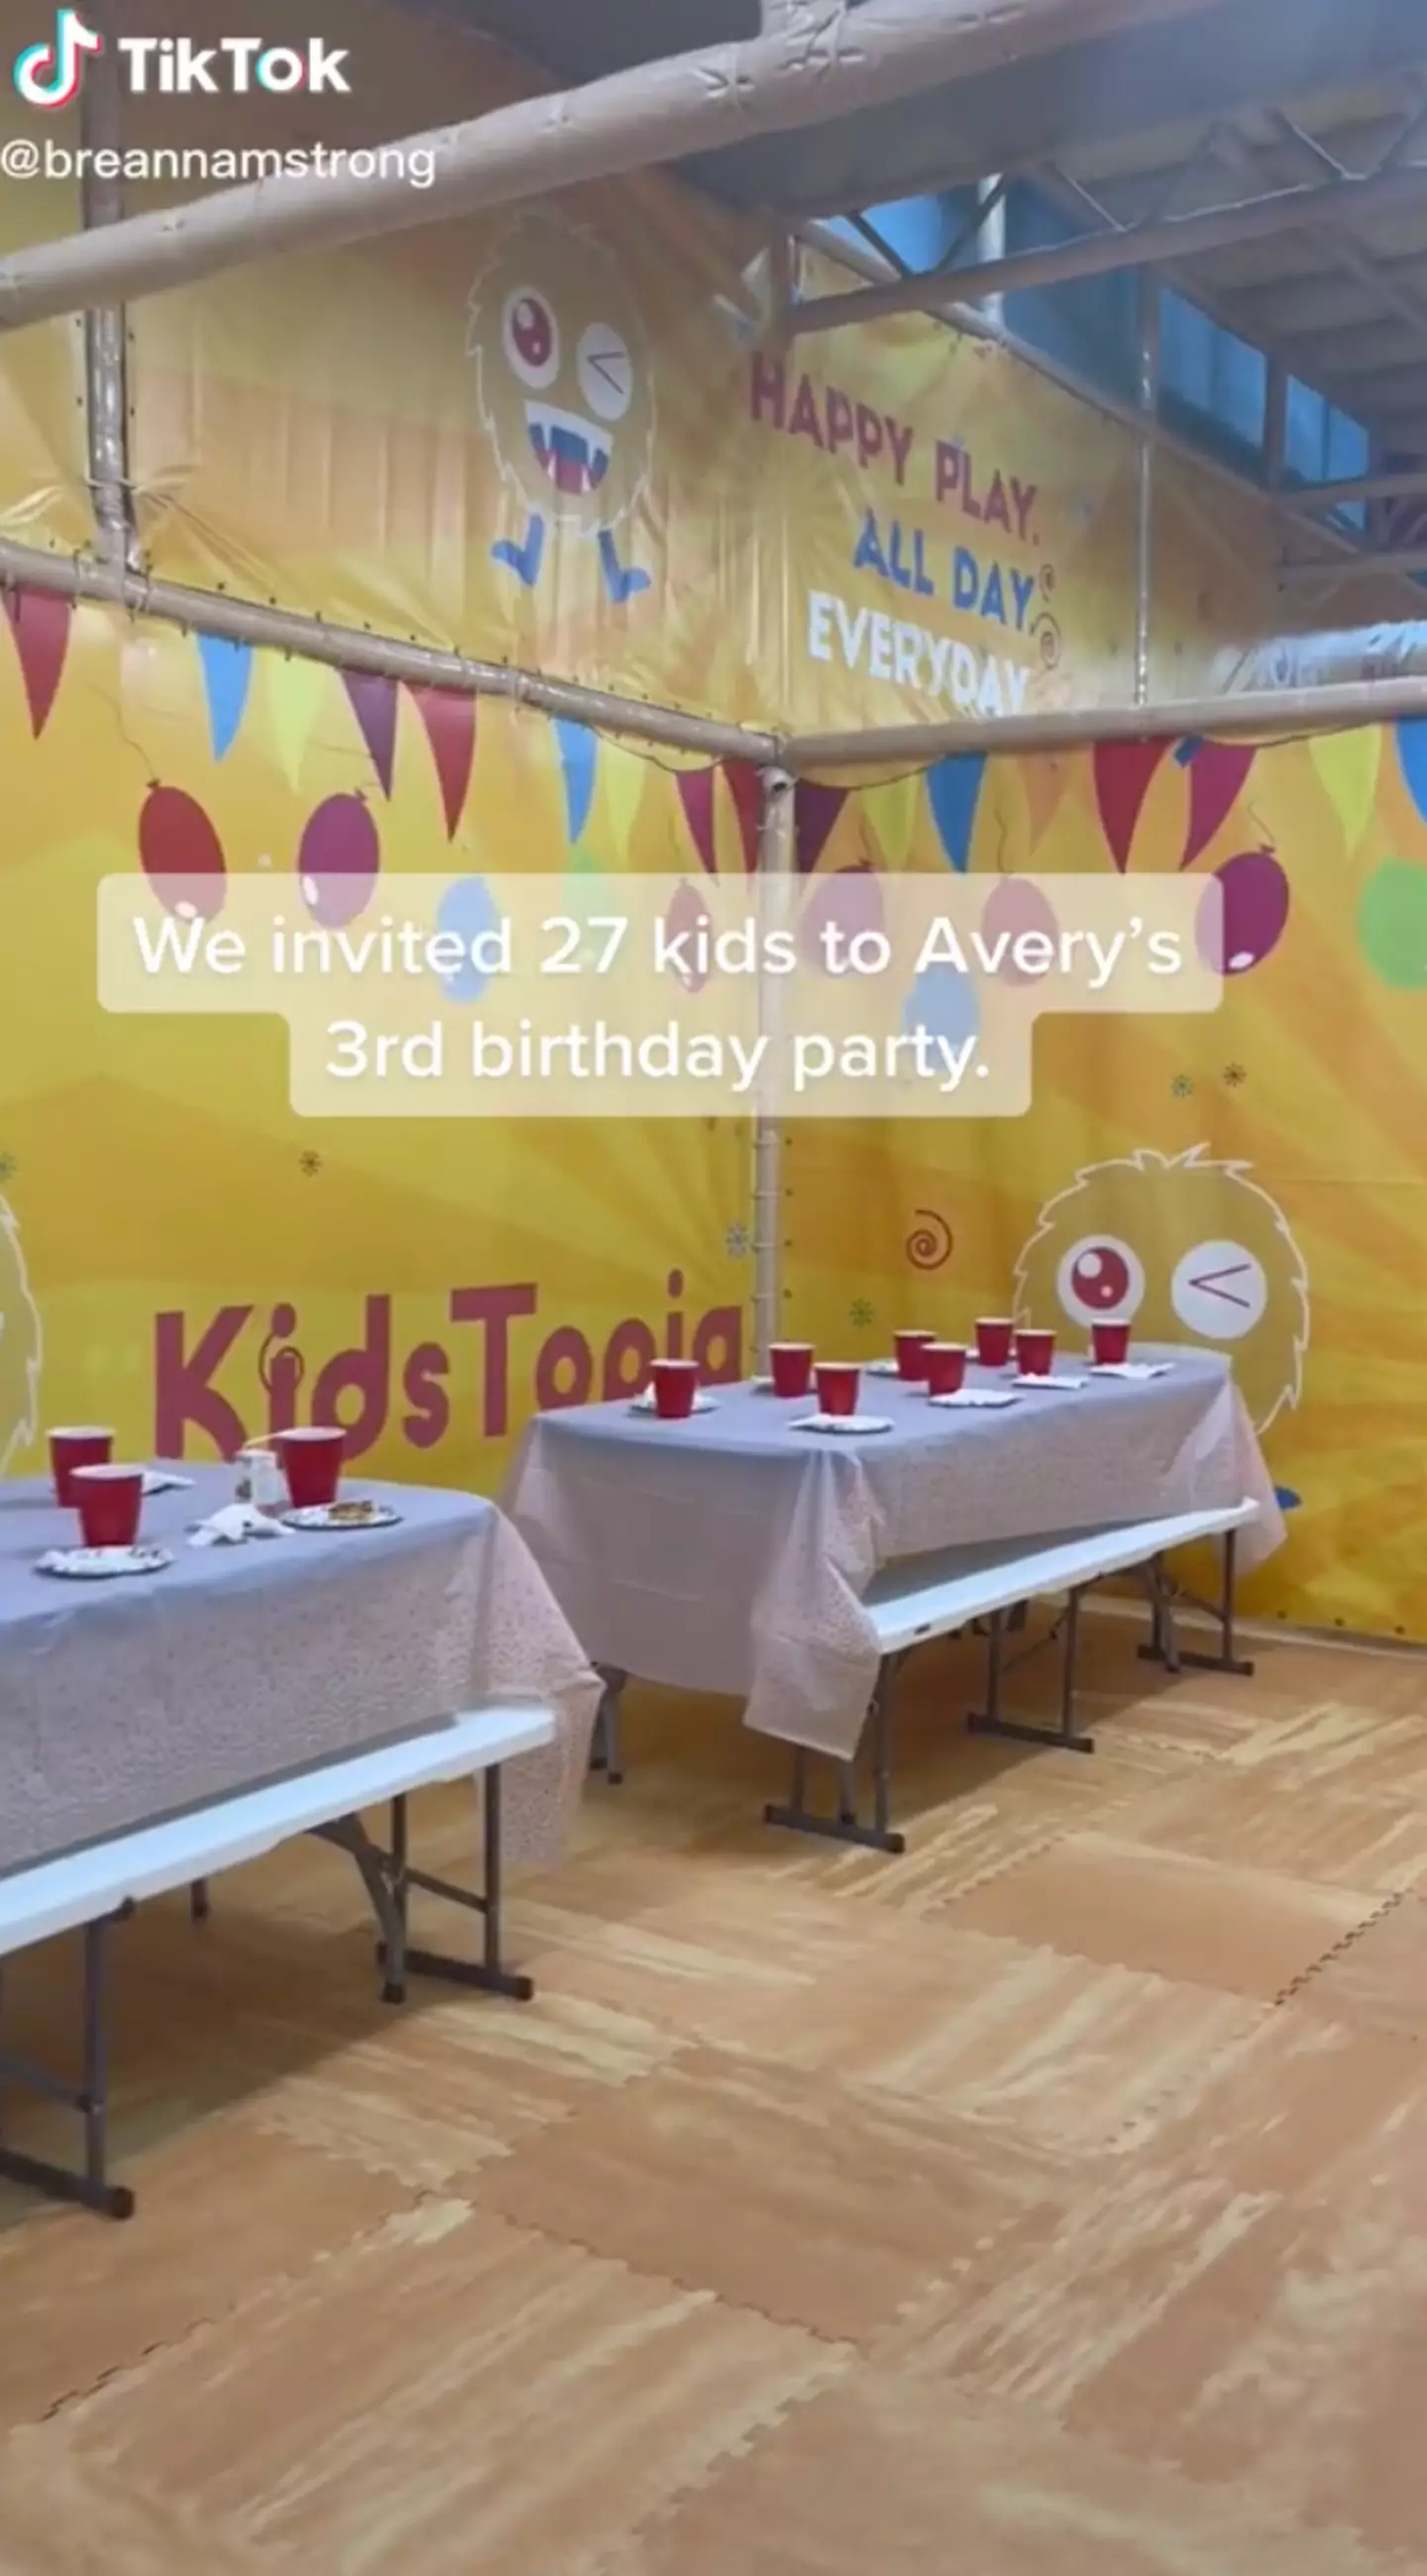 One mum’s day ended in disaster when not a single of her daughter’s 27 classmates showed up for her party.